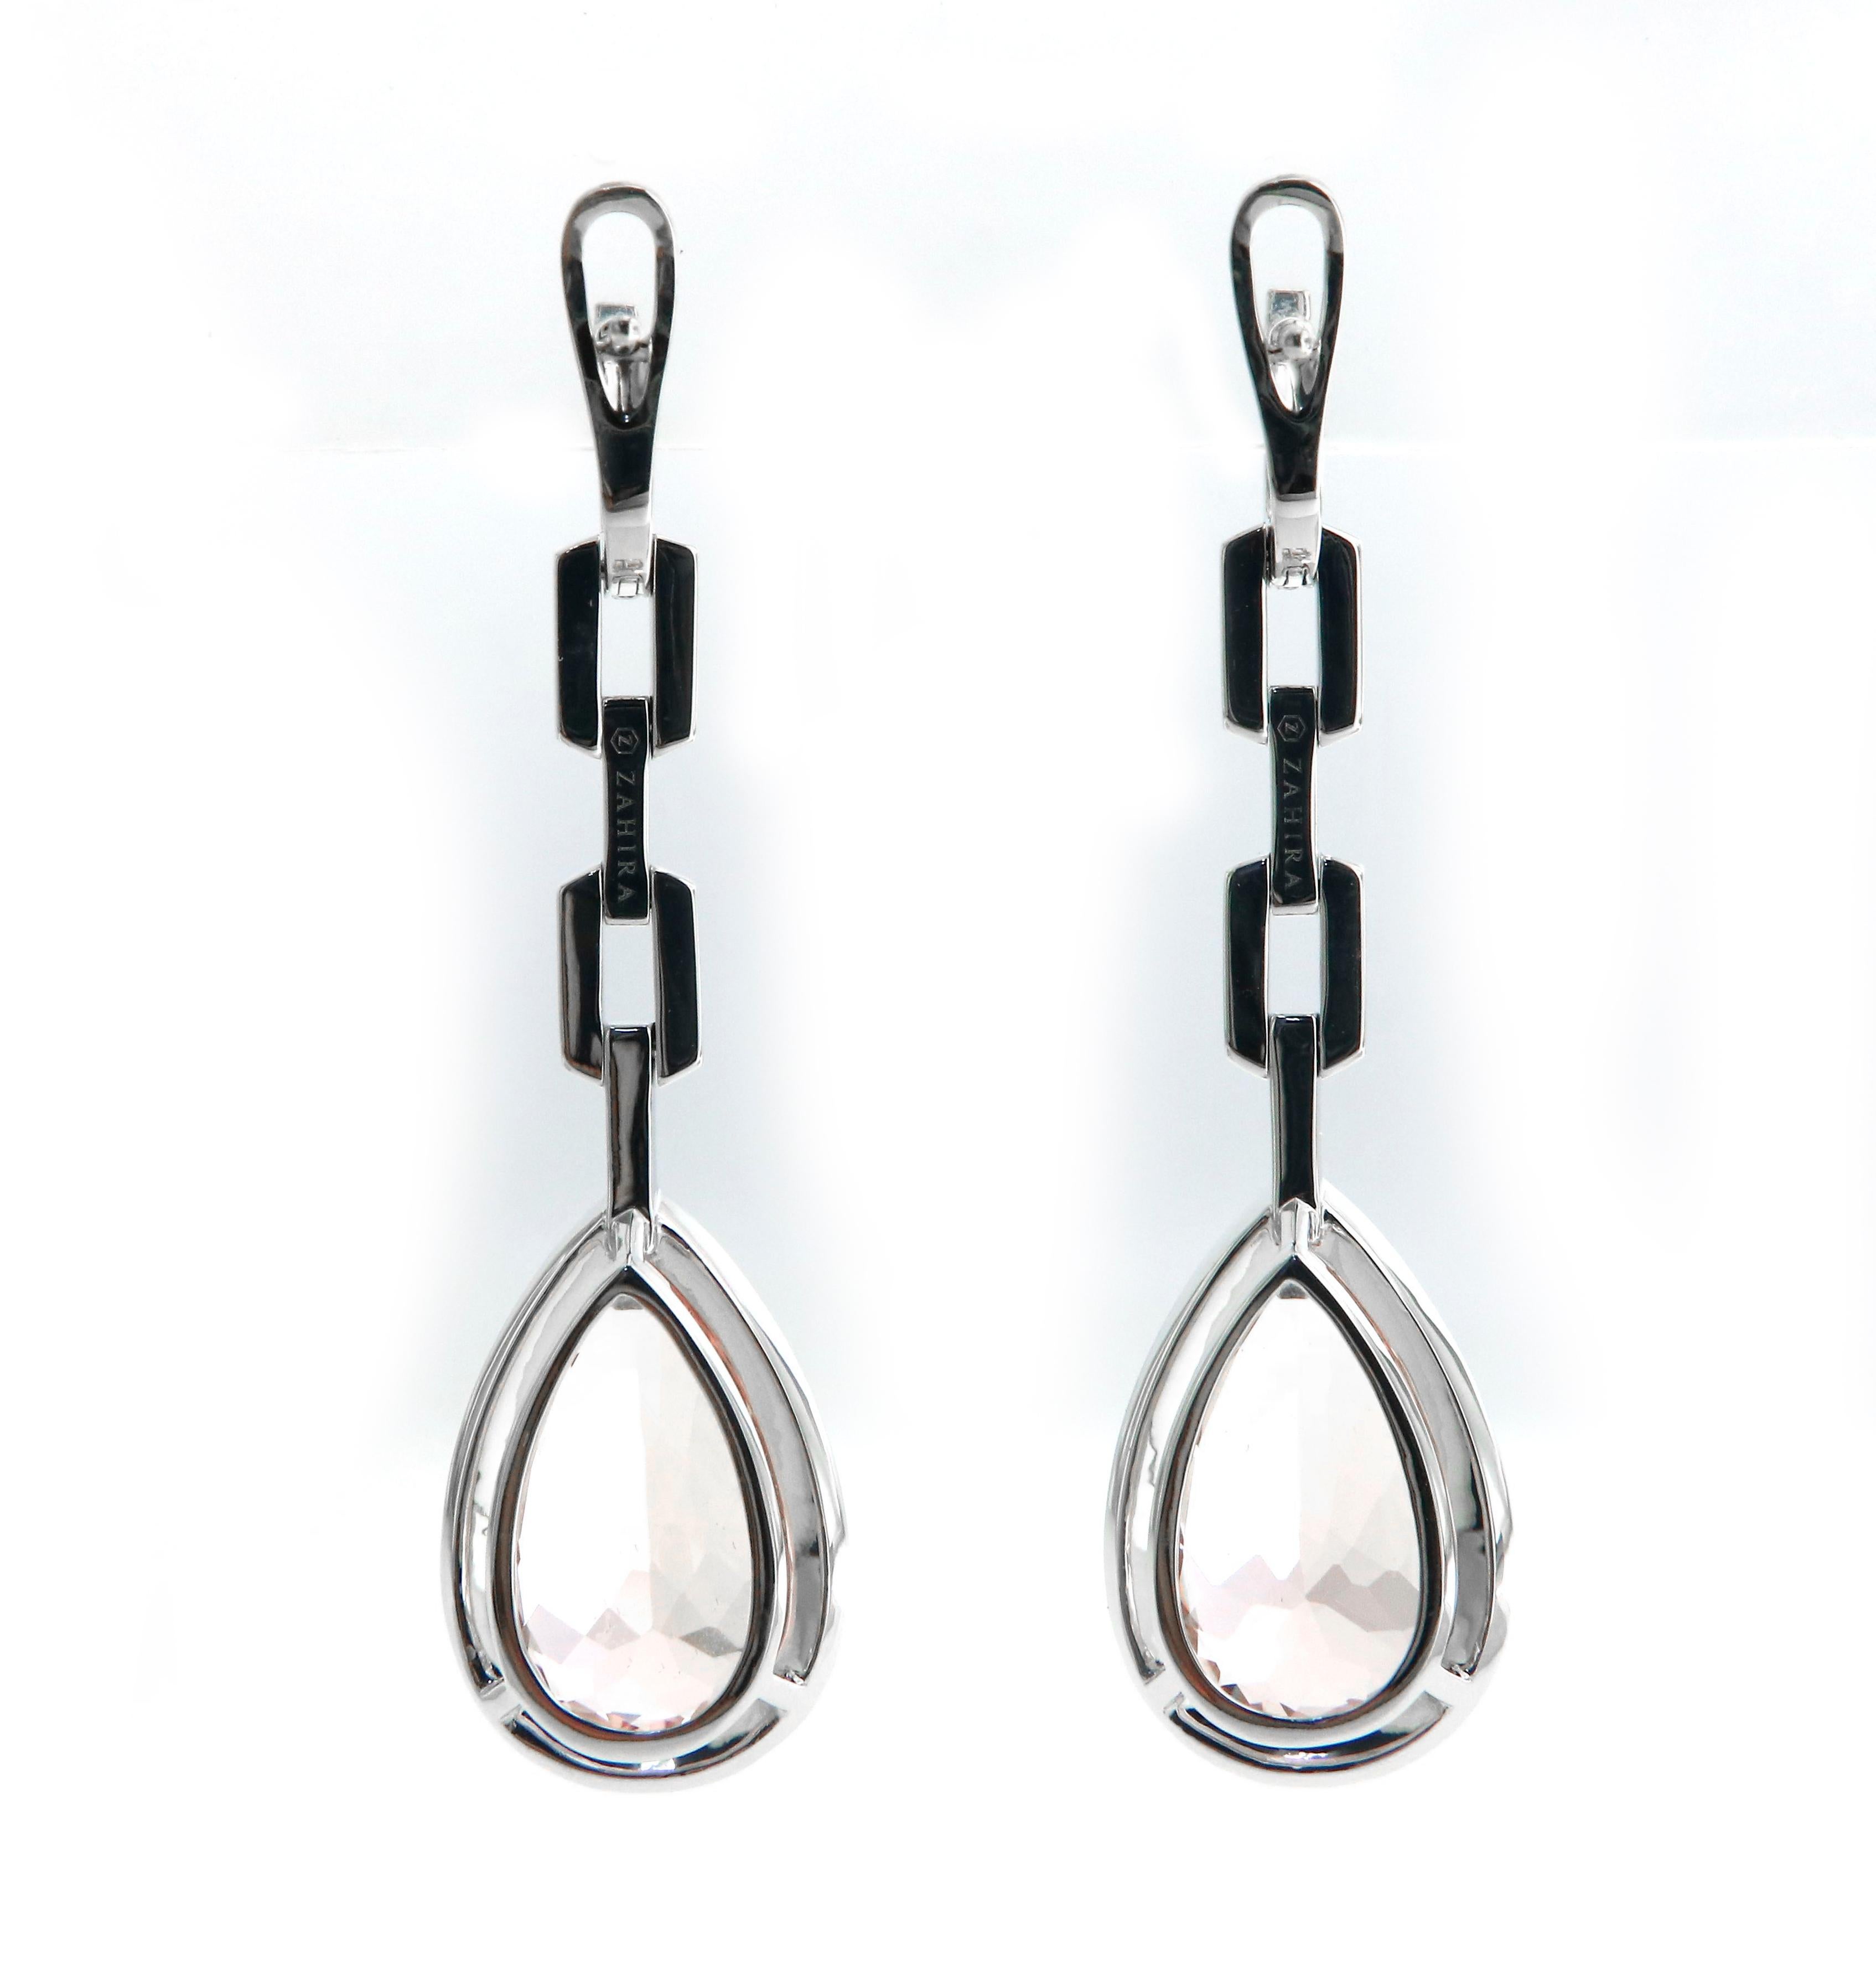 This is a pair of pear-shaped Morganite drop earrings with pave' diamonds set in 18k white gold. The Morganite gemstones are prong set and surrounded by a halo of vvs quality diamonds. The chain-link design is clean with moving hinges and are also